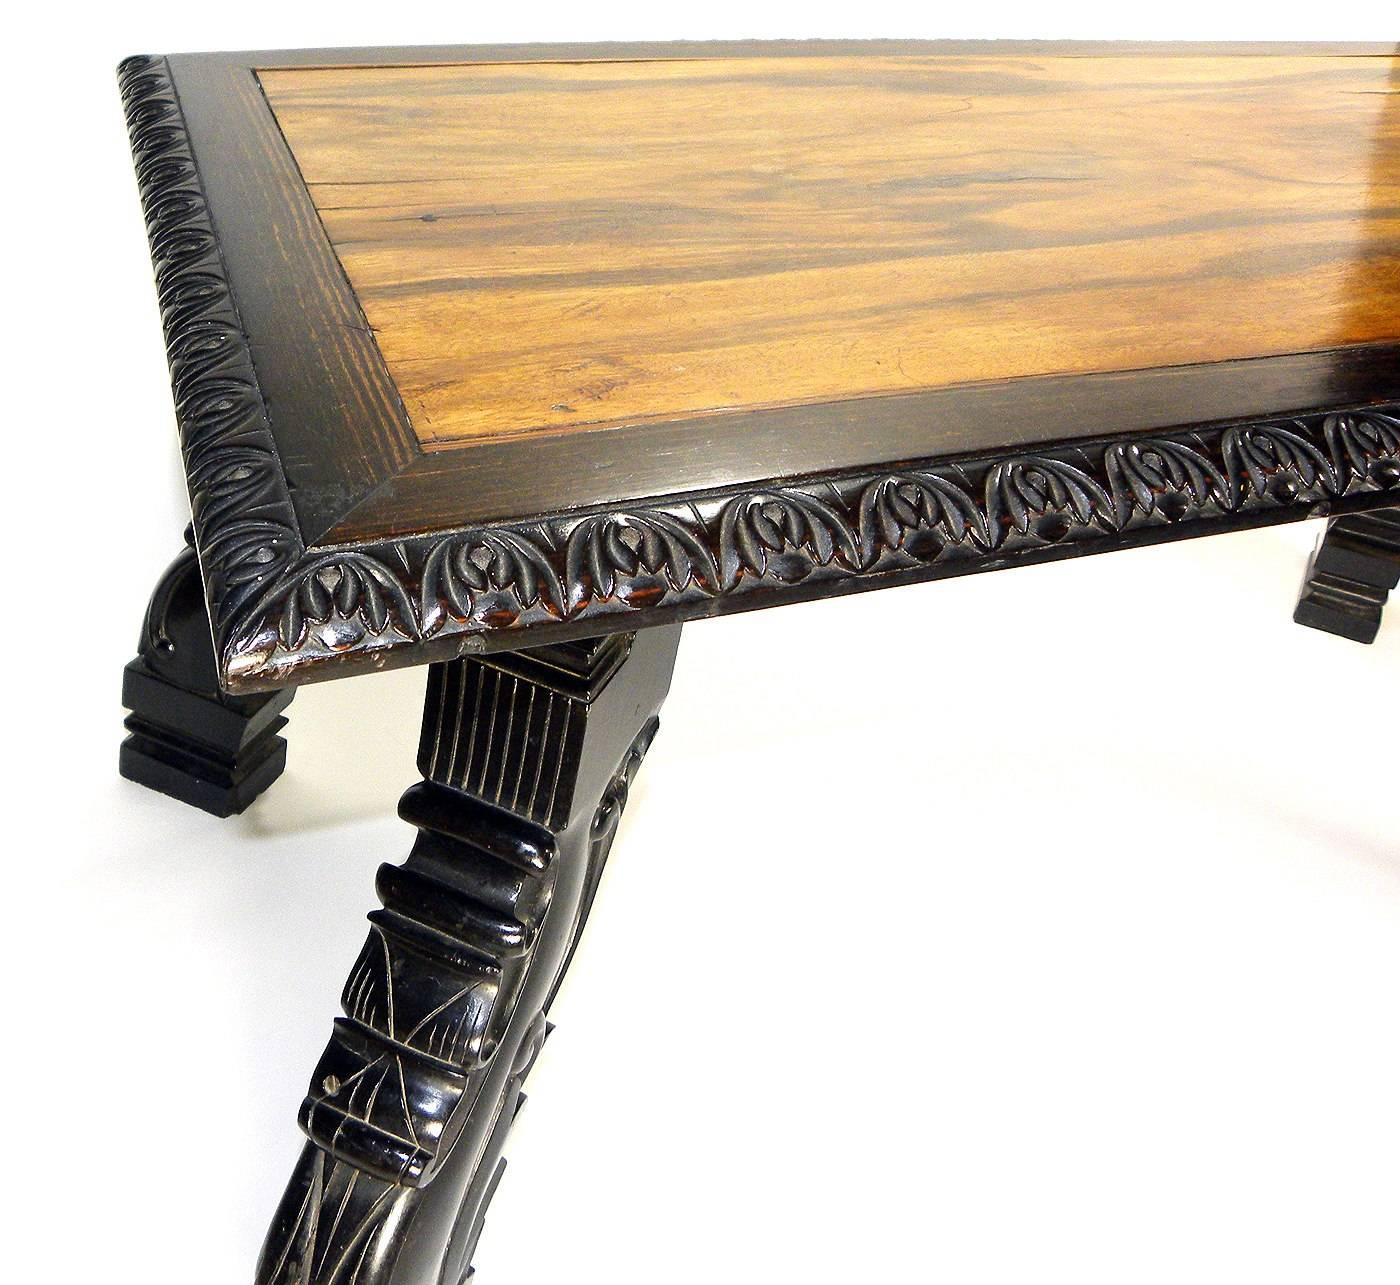 A rectangular topped tabled with leaf tip carving around the edge, the top resting on striking carved and out-swept legs of solid ebony. Probably Ceylon. 